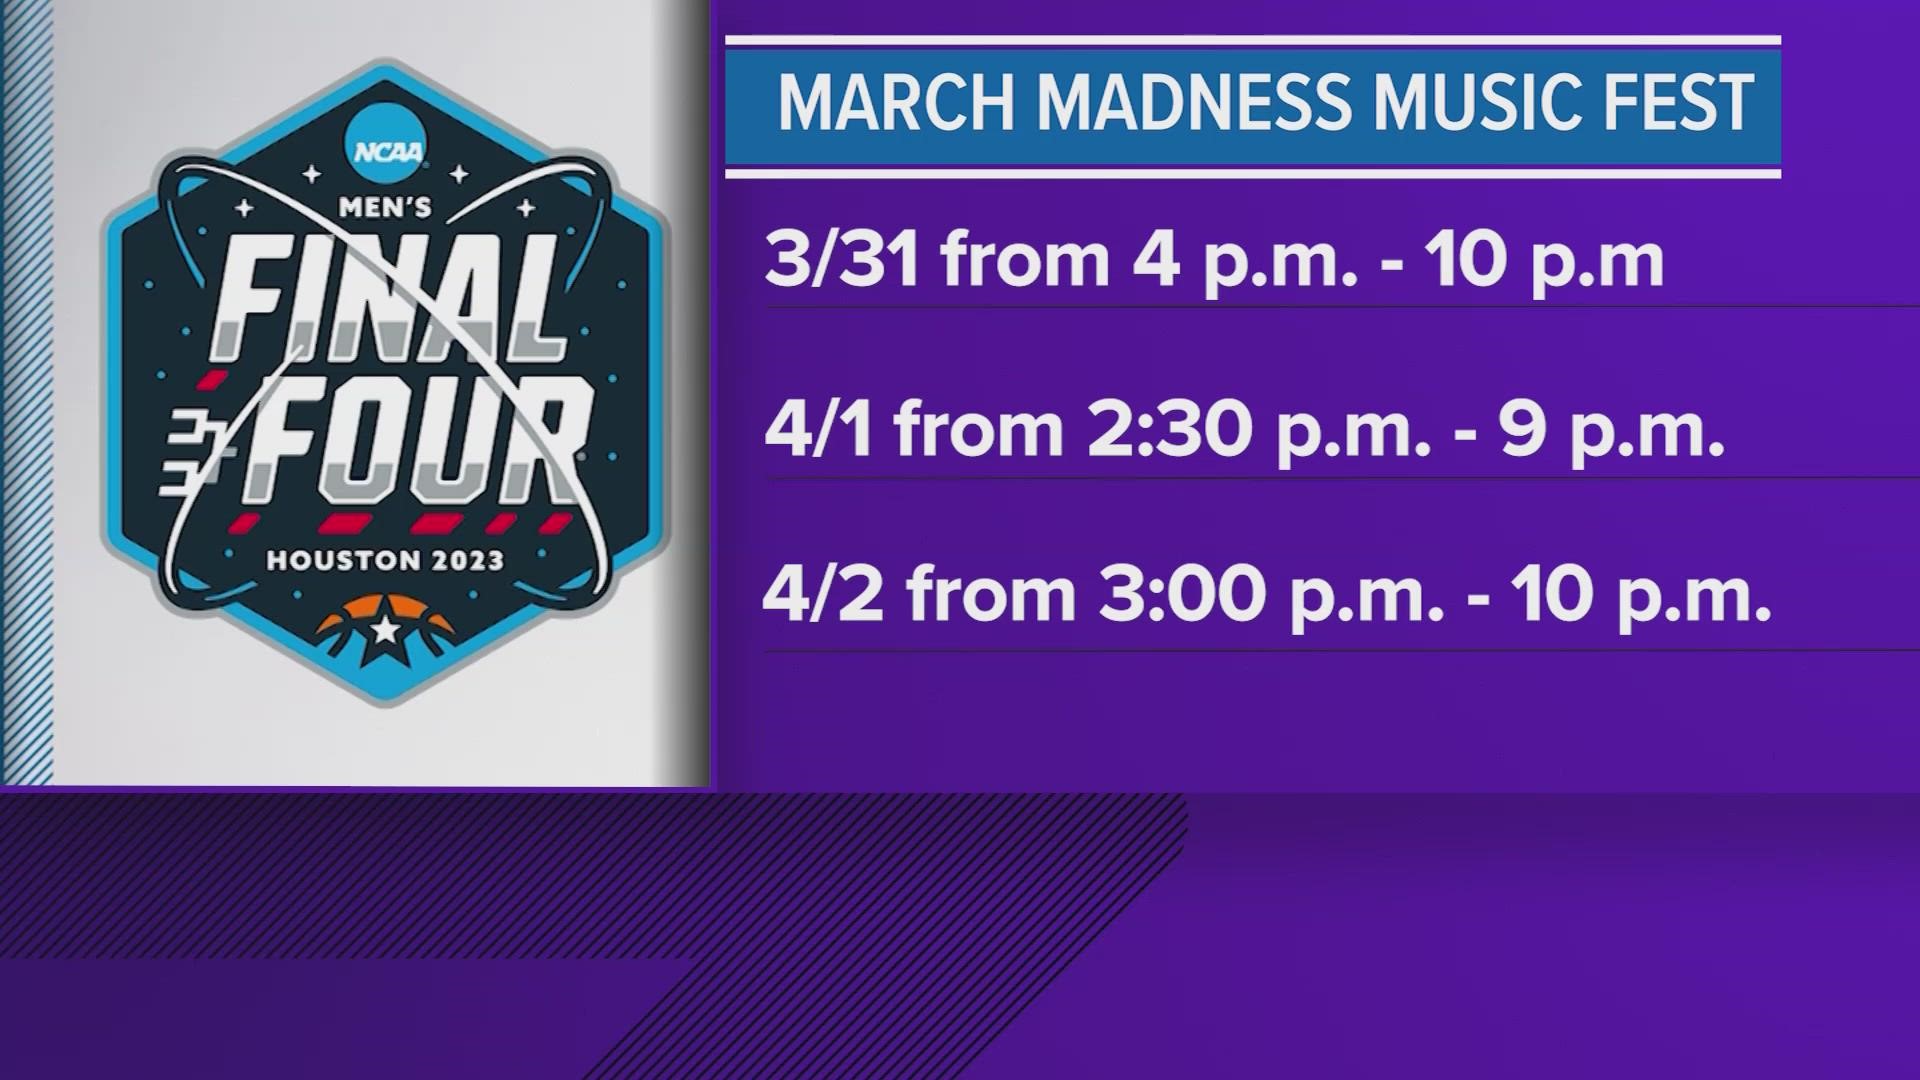 Some of the March Madness Music Festival acts were announced on March 1. Those acts include Lil Nas X and Tim McGraw.